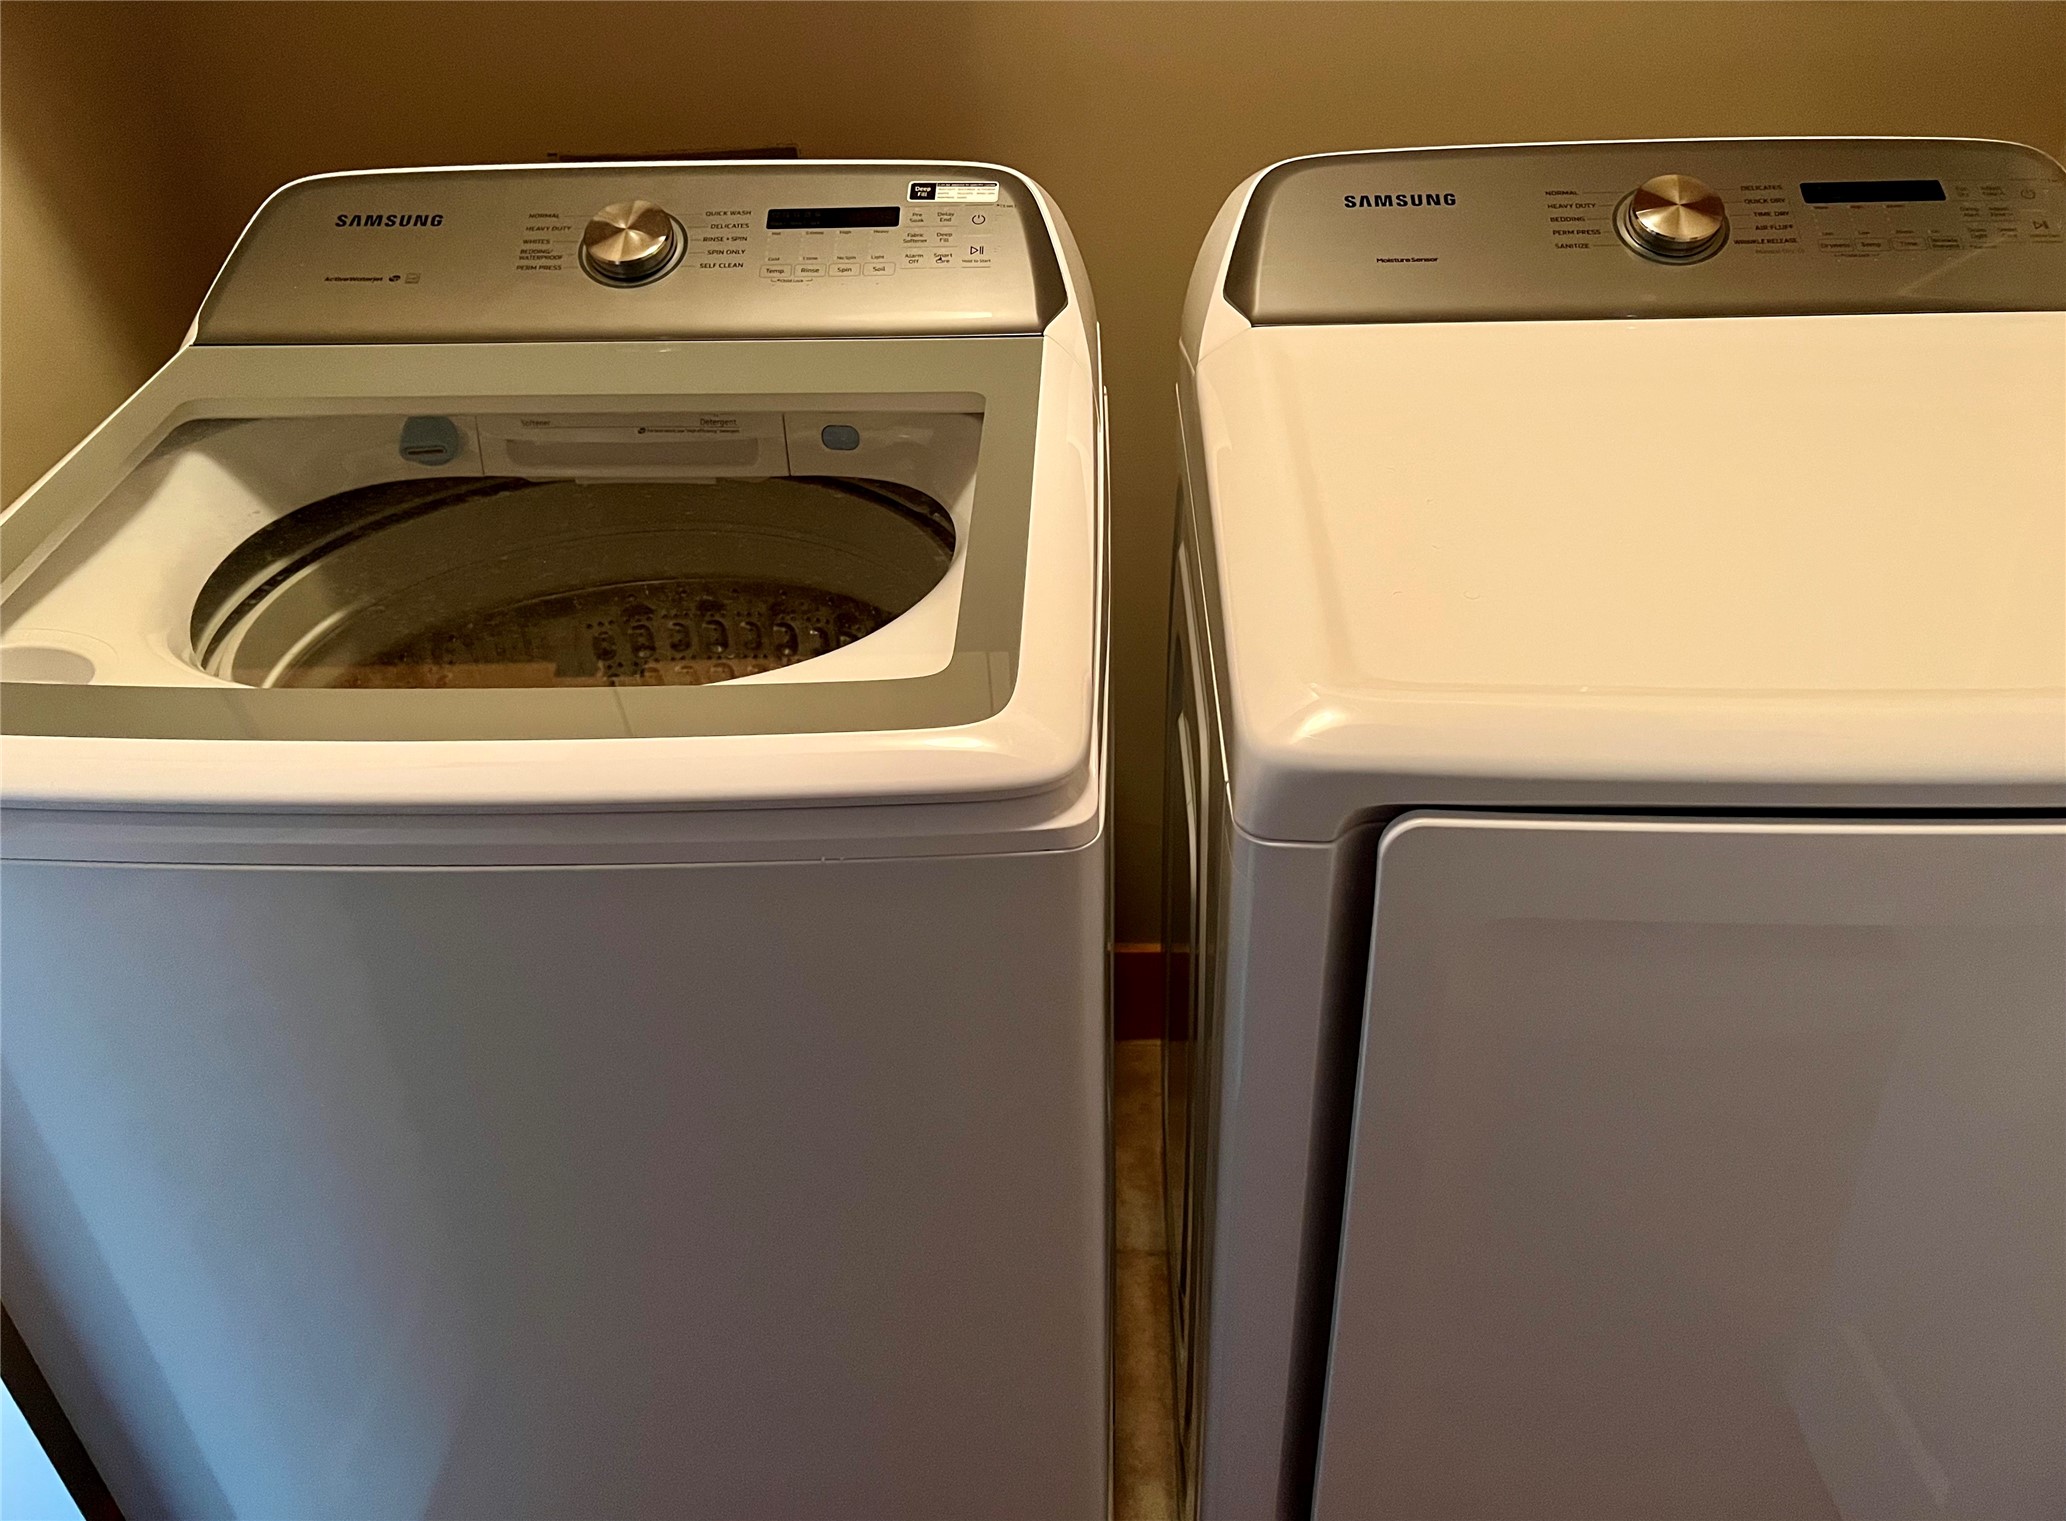 Utility room with Samsung washer and dryer, located on the third floor.